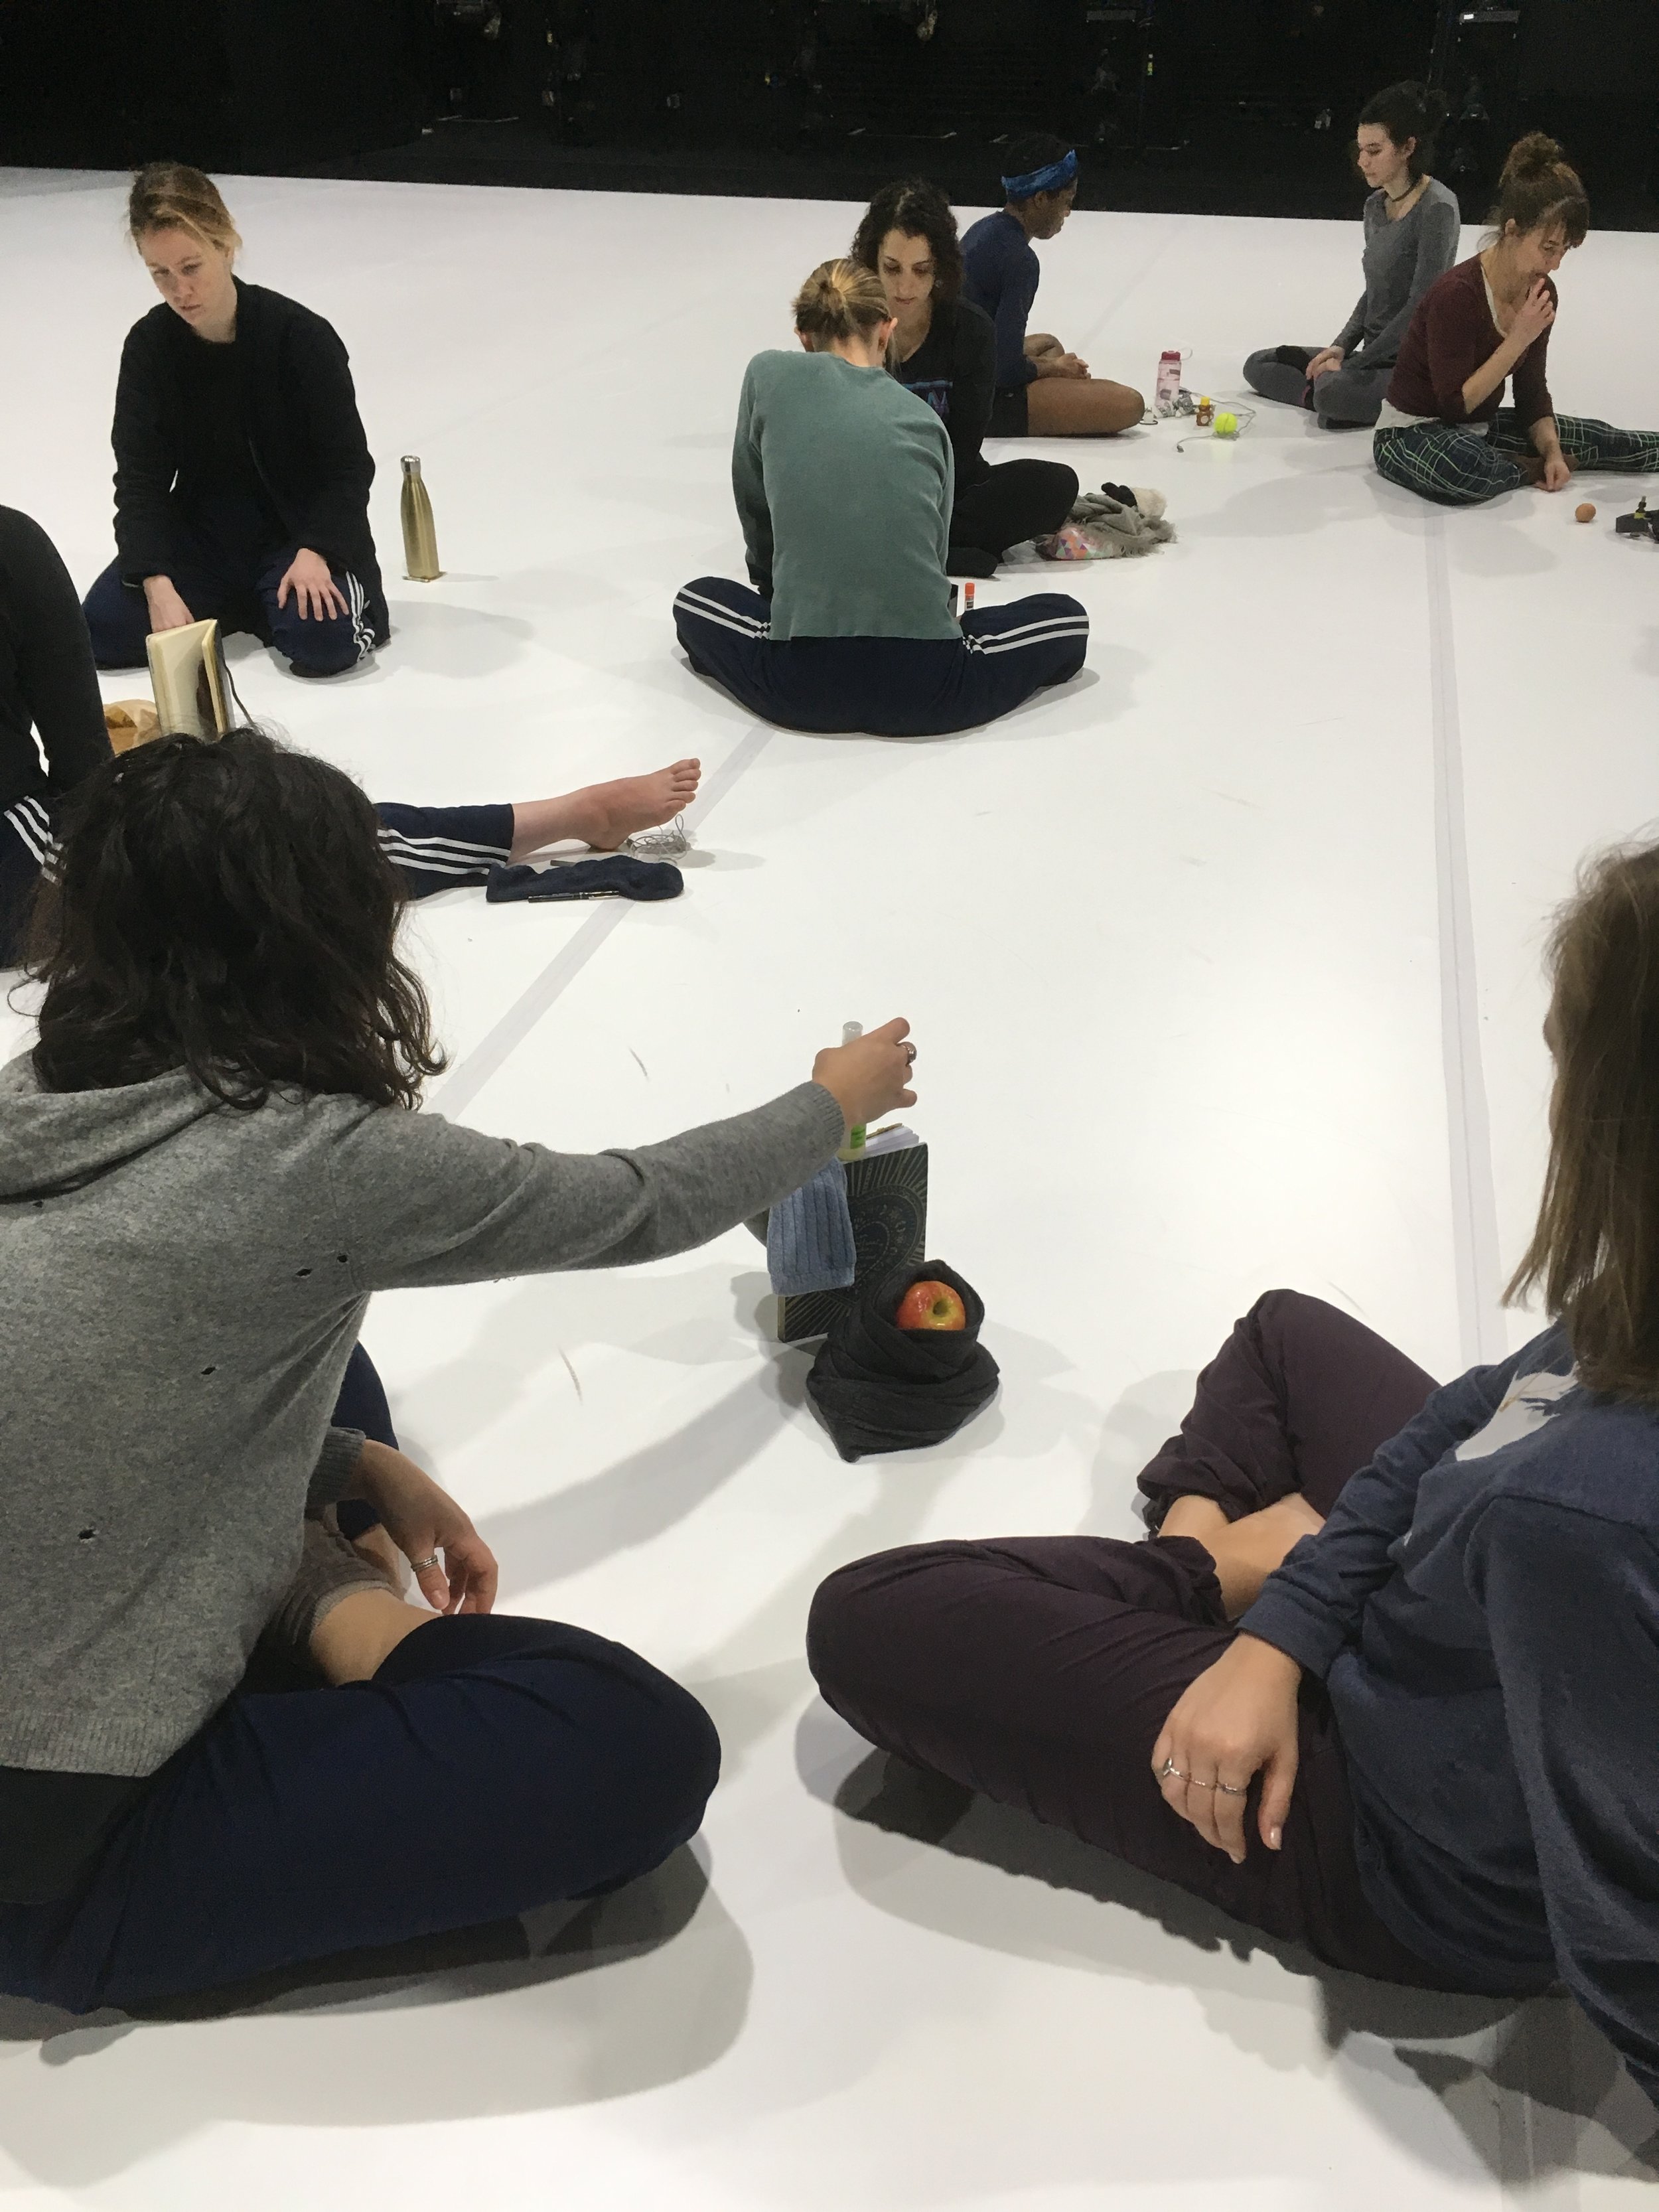 Workshop with Sue & Bebe, New York Live Arts, February 2018